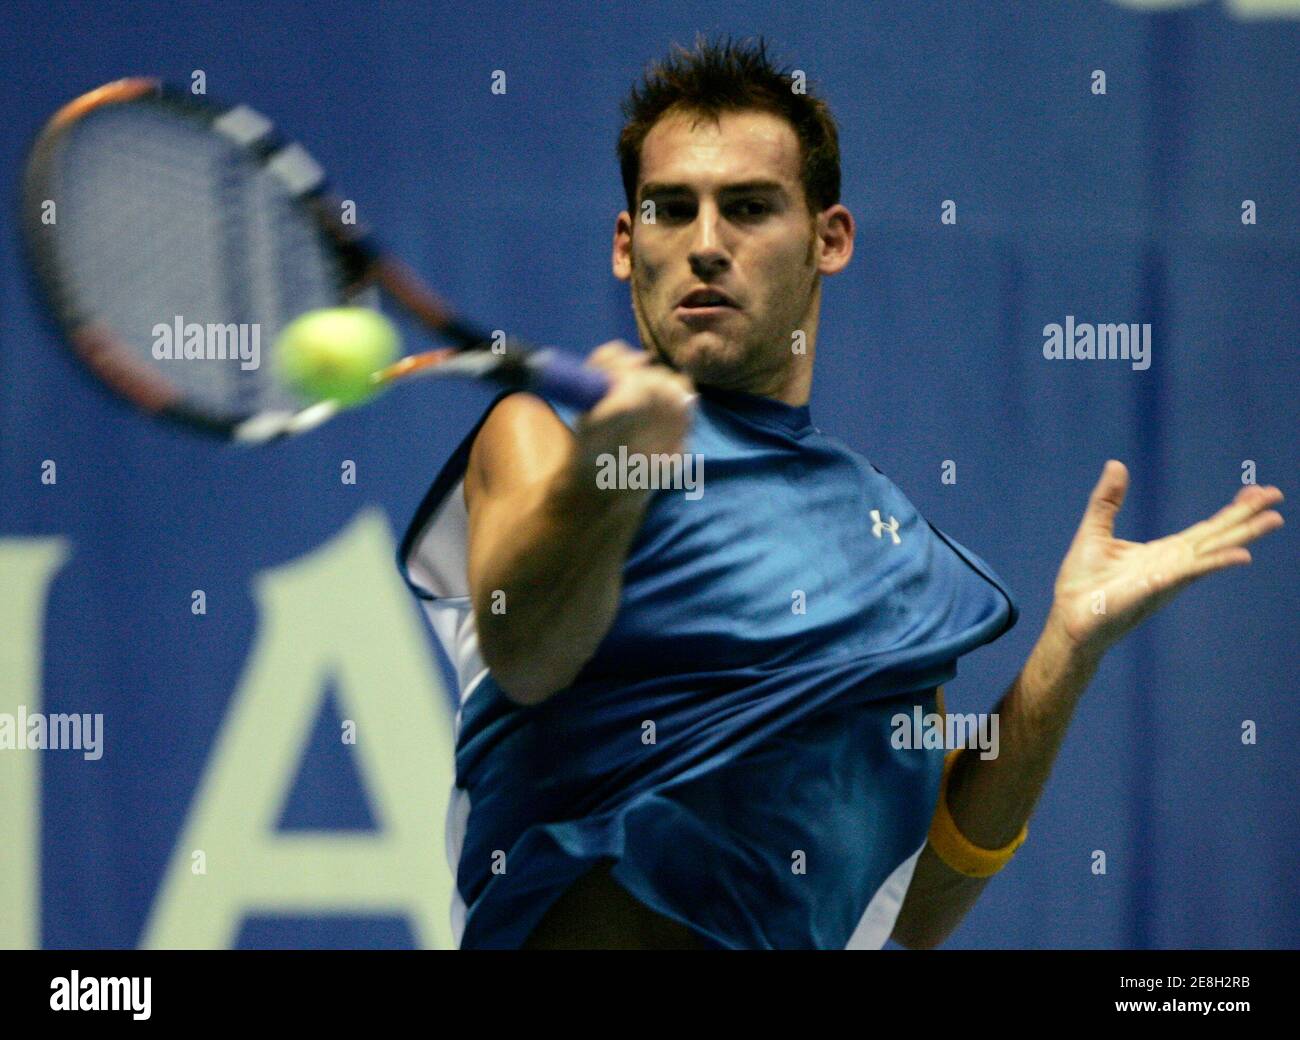 Robby Ginepri of the U.S. returns a shot to Kenneth Carlsen of Denmark during their first round match Thailand Open tennis tournament in Bangkok September 26, 2006.   REUTERS/Chaiwat Subprasom (THAILAND) Stock Photo